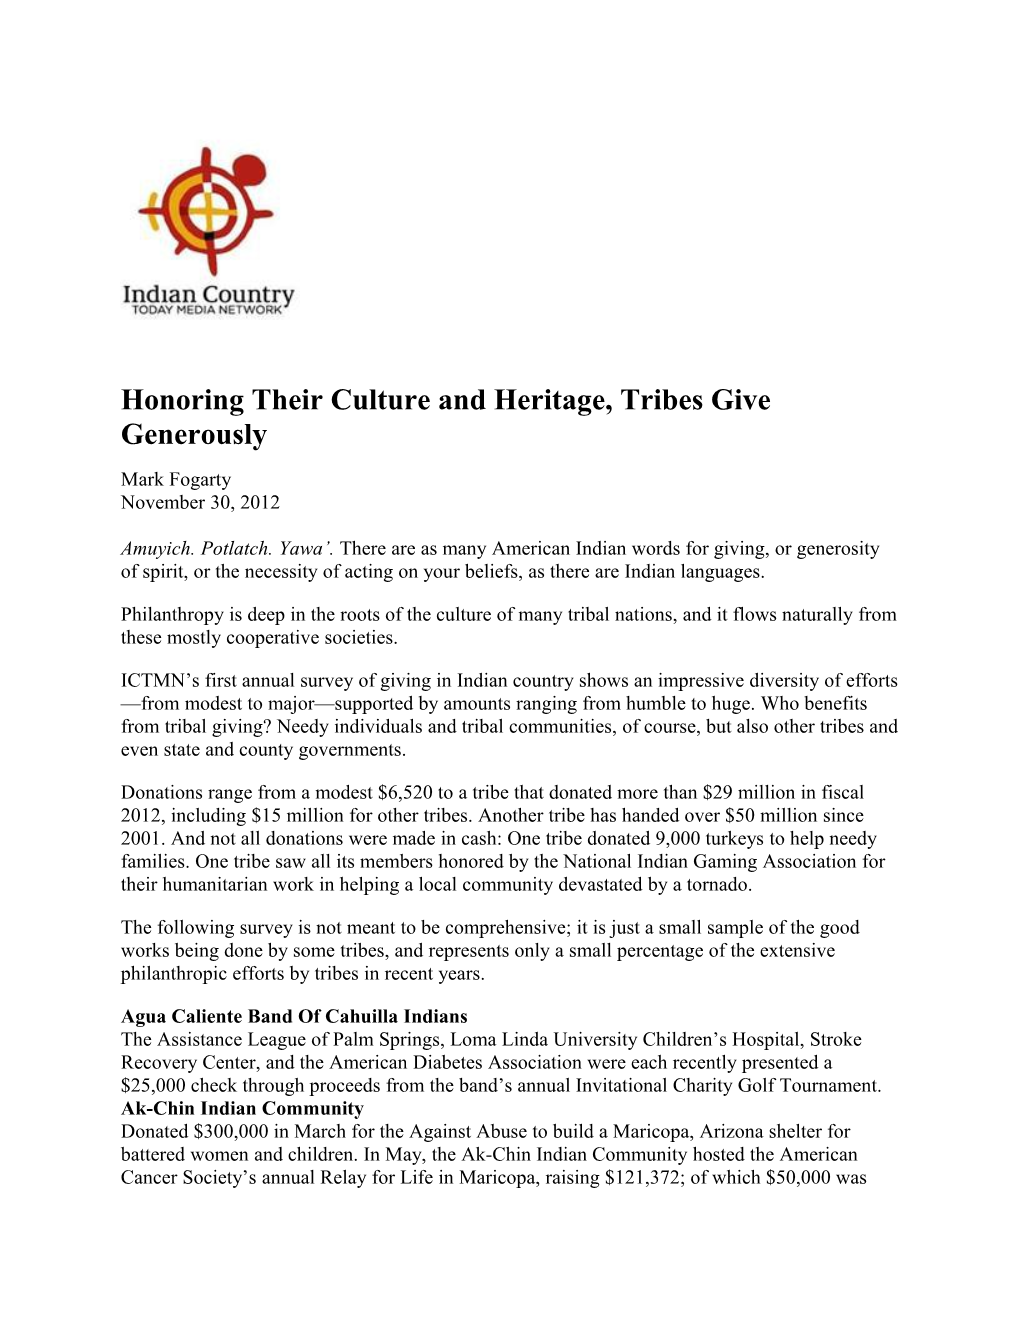 Honoring Their Culture and Heritage, Tribes Give Generously